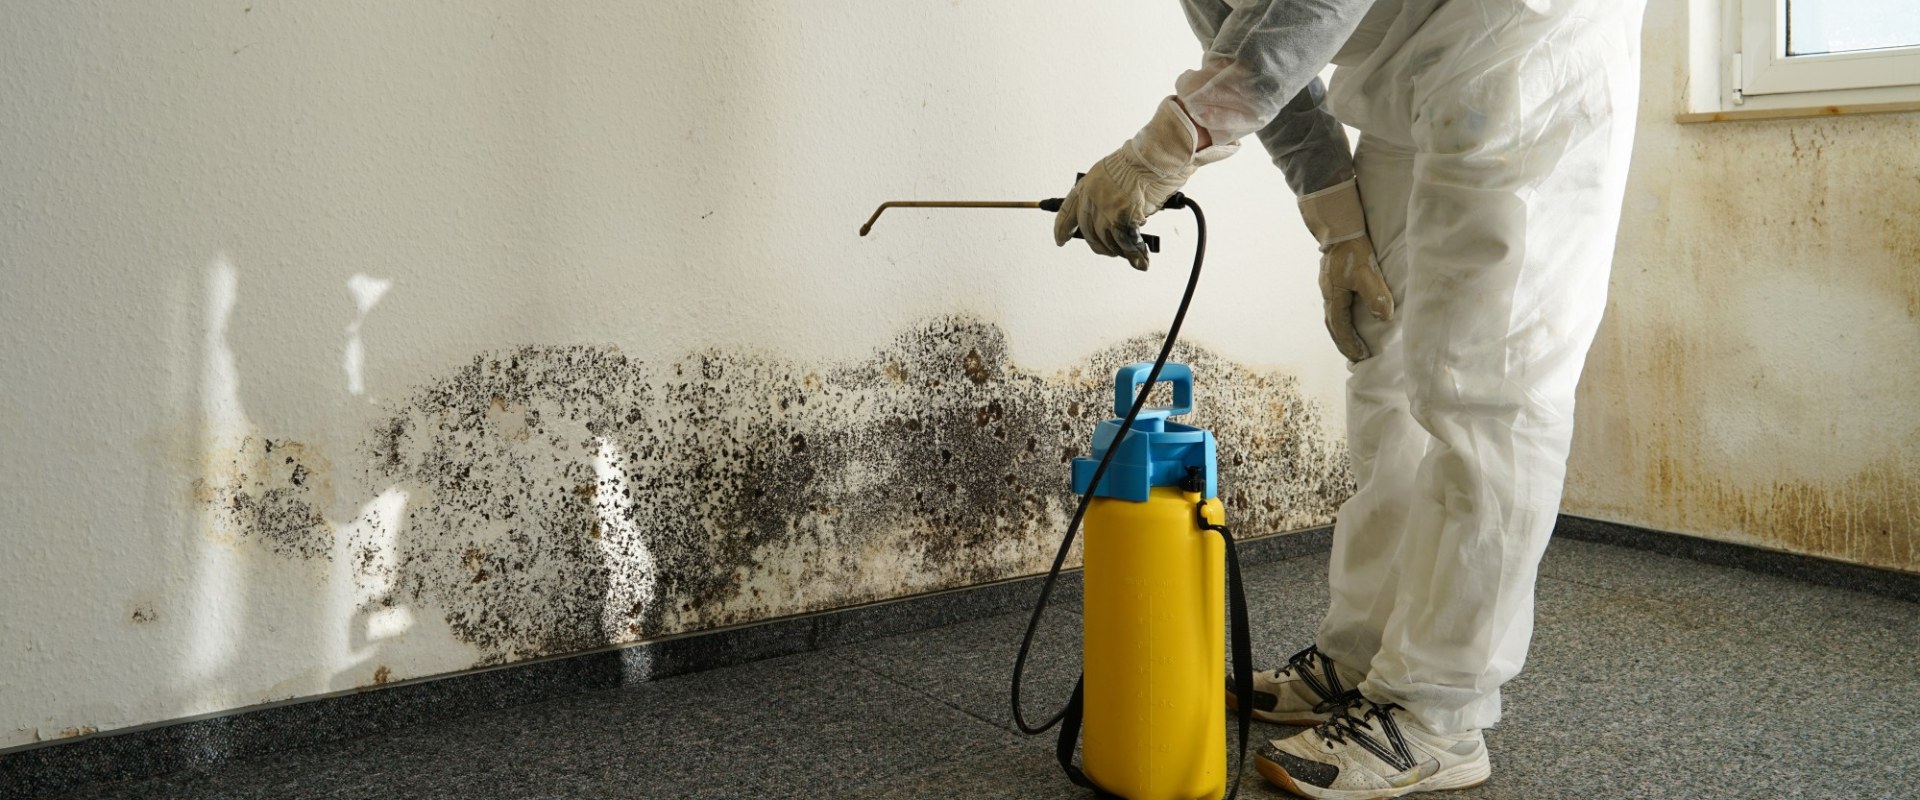 What Type of Equipment is Used for Mold Remediation?